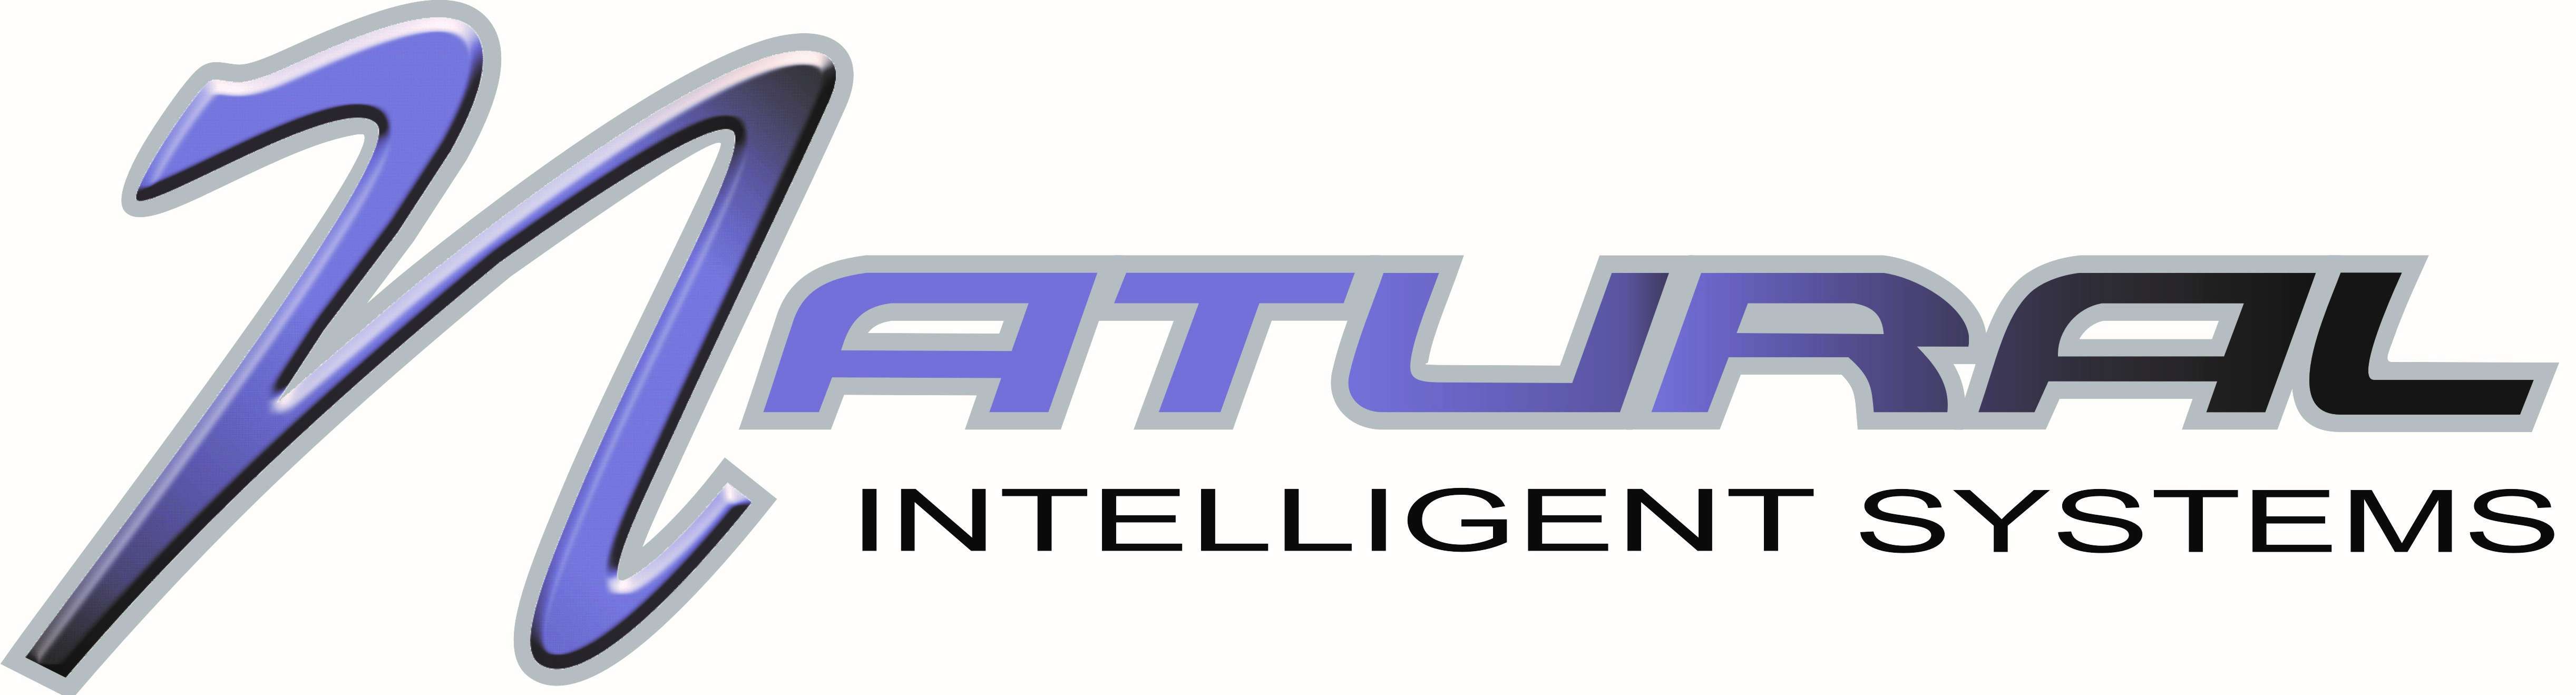 Natural Intelligent Systems